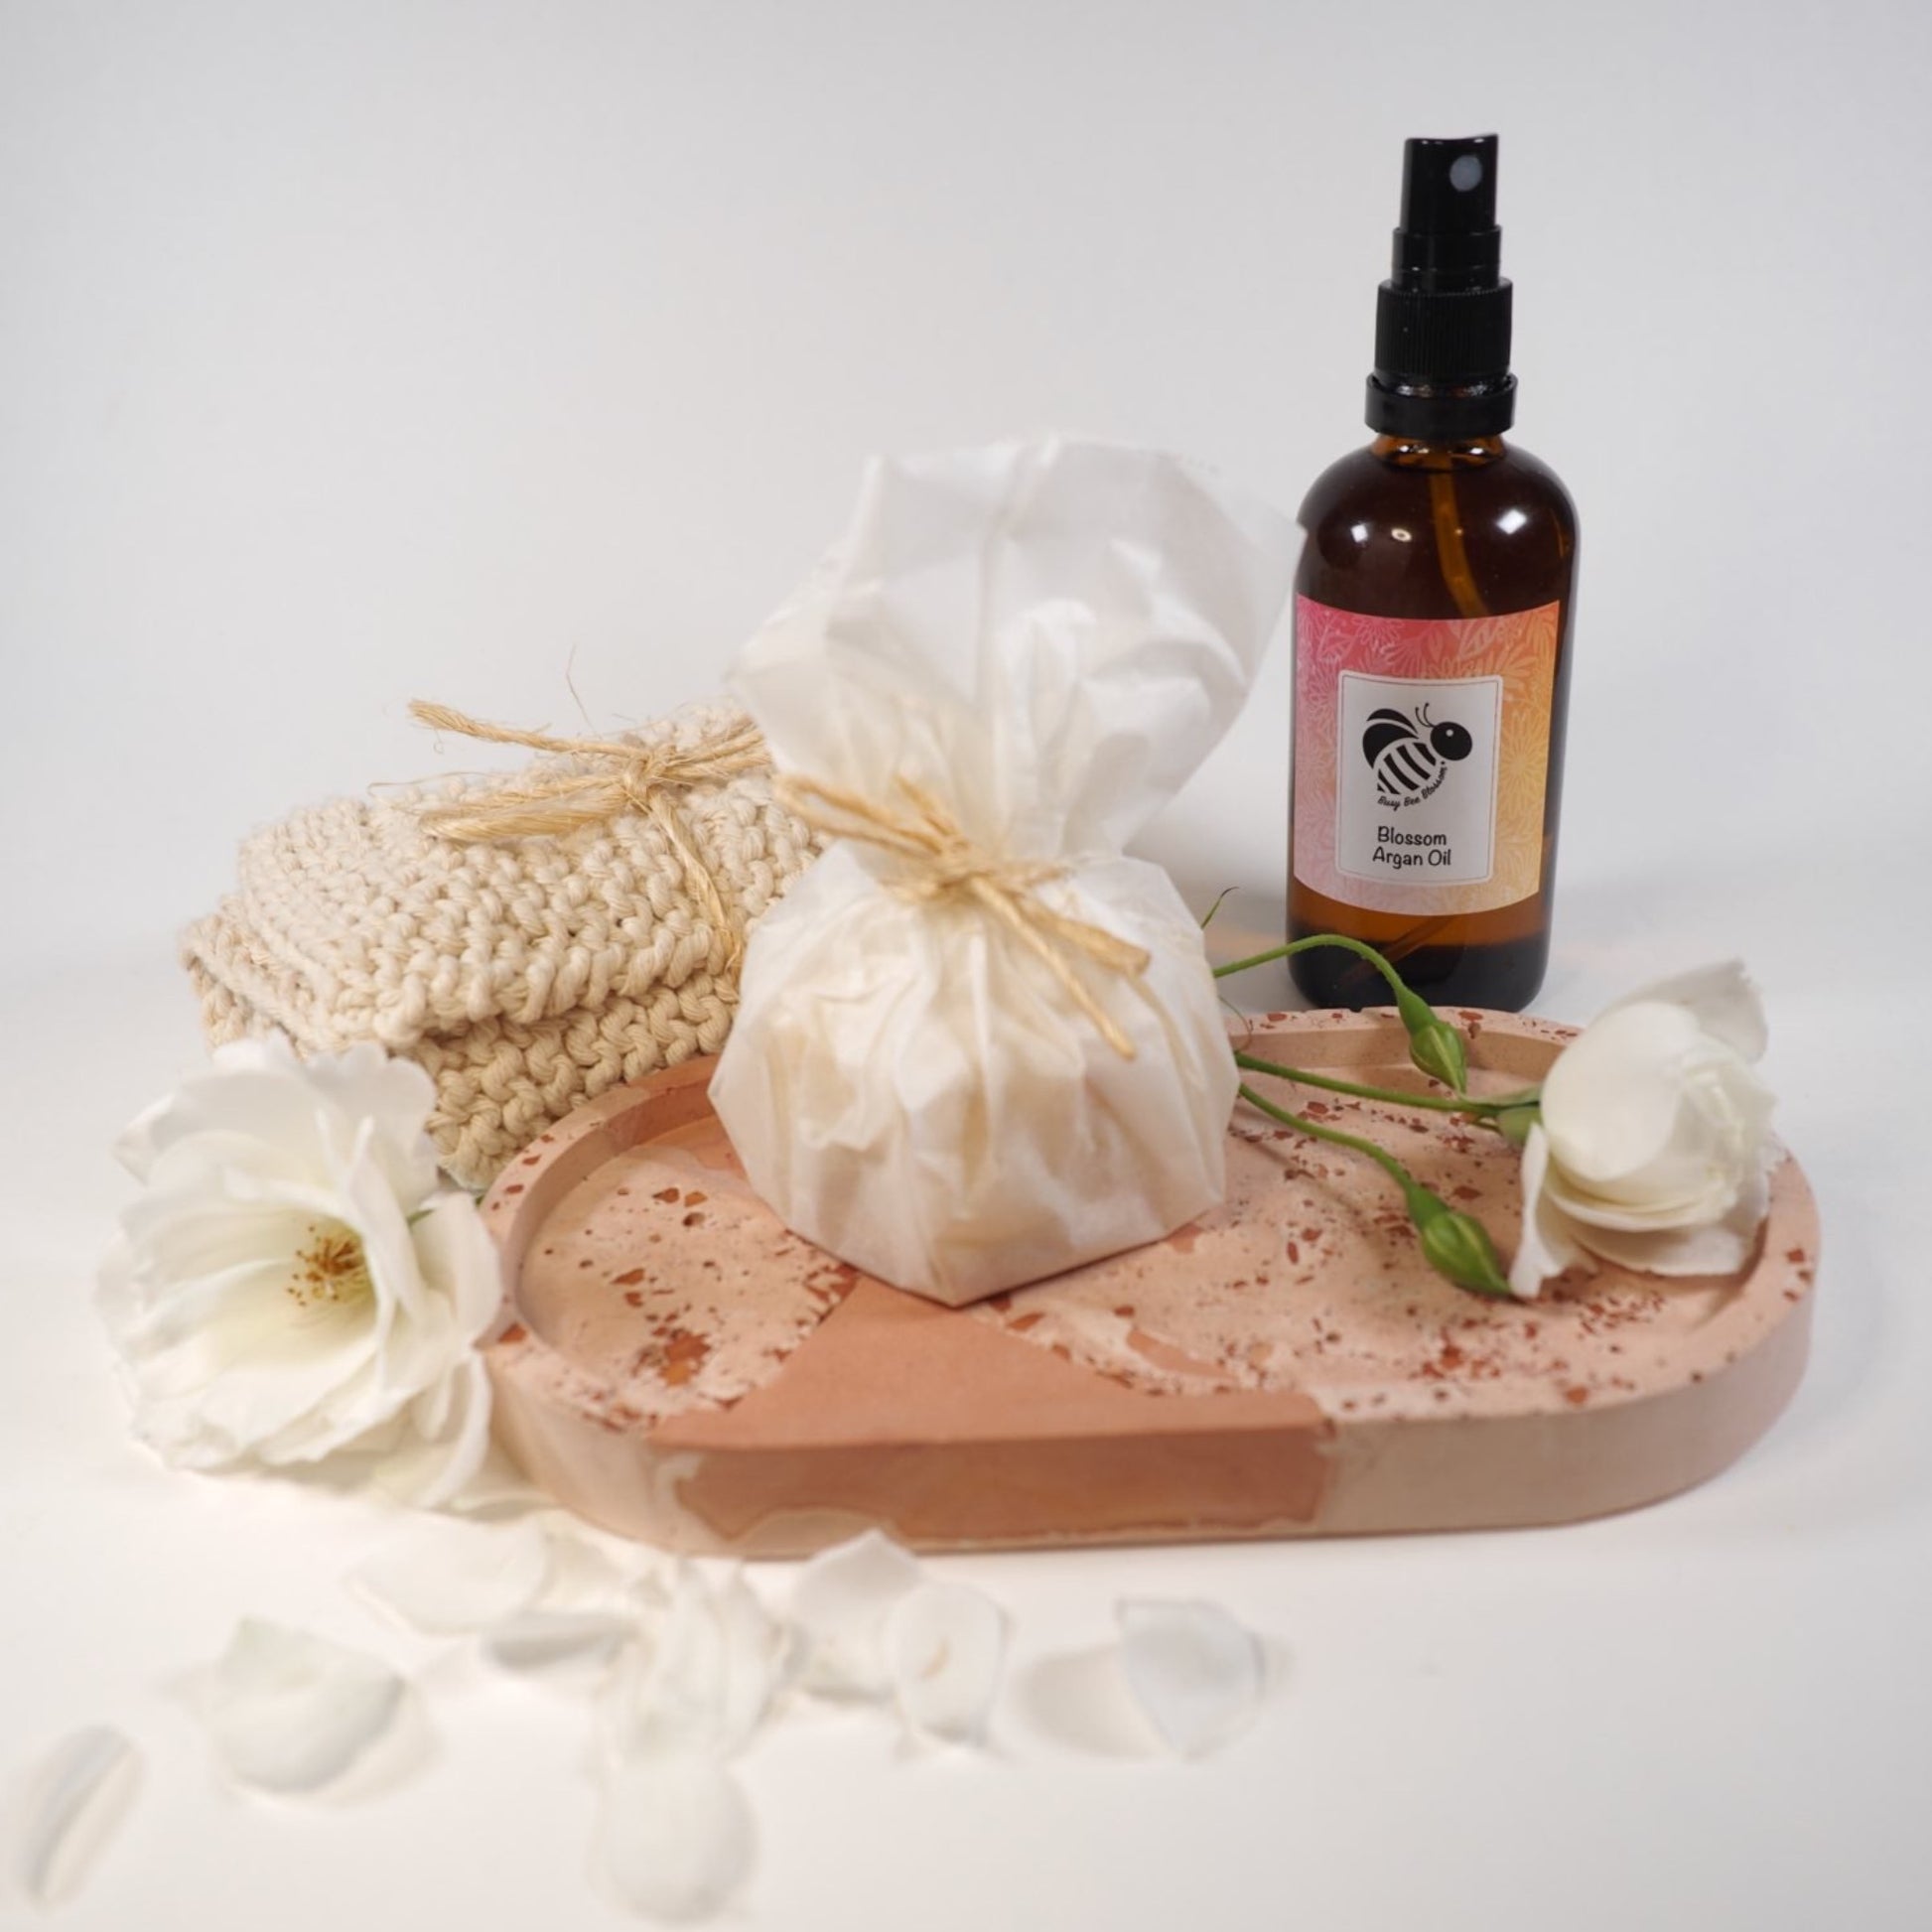 Blossom Pure Moroccan Argan Oil with oval cement dish, face cloth, cleansing bar soap and roses.